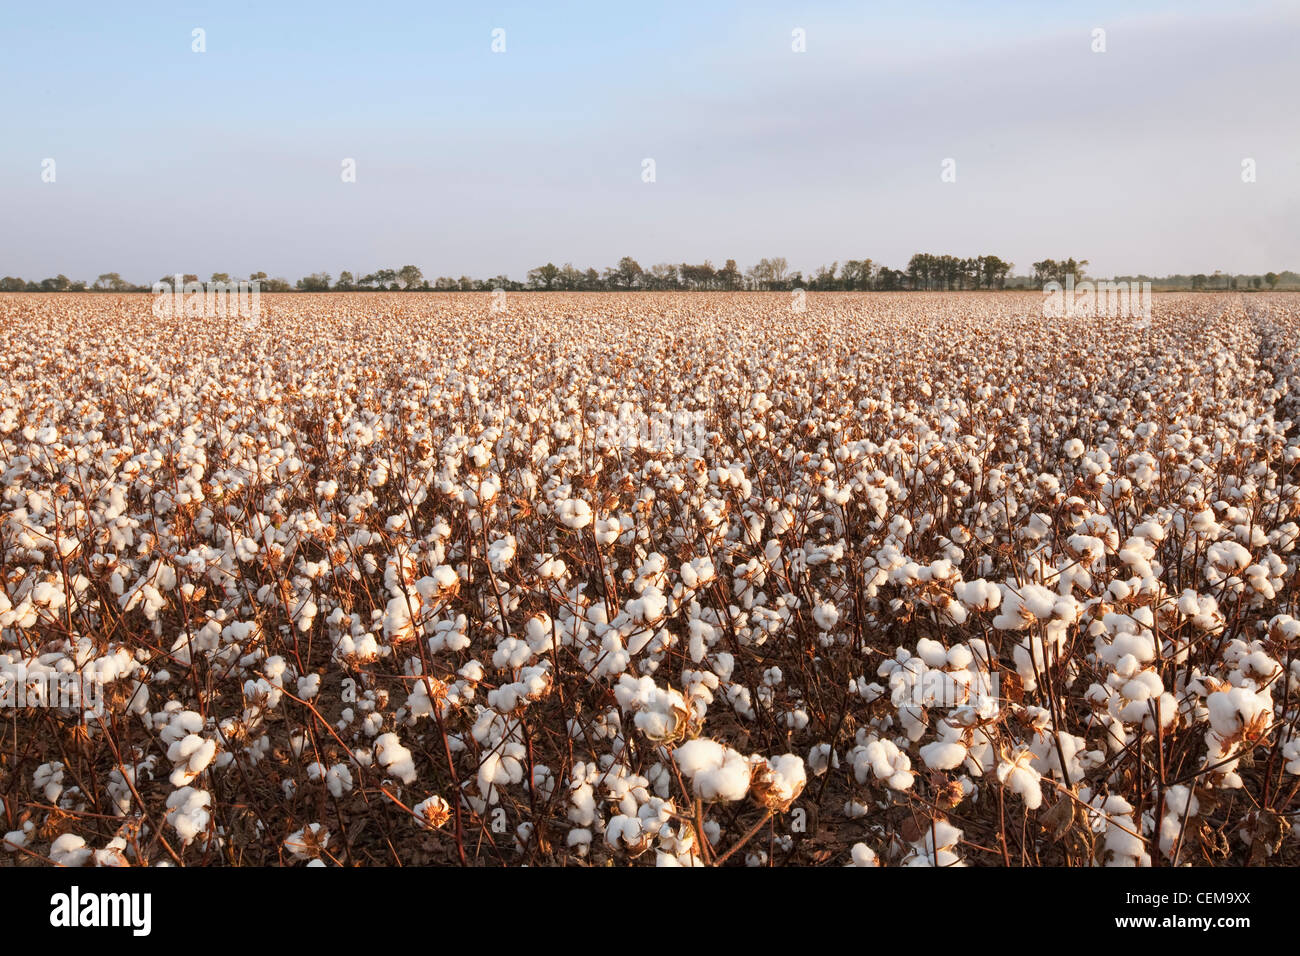 Large field of mature defoliated high-yield cotton at harvest stage in late afternoon Autumn light / near England, Arkansas, USA Stock Photo